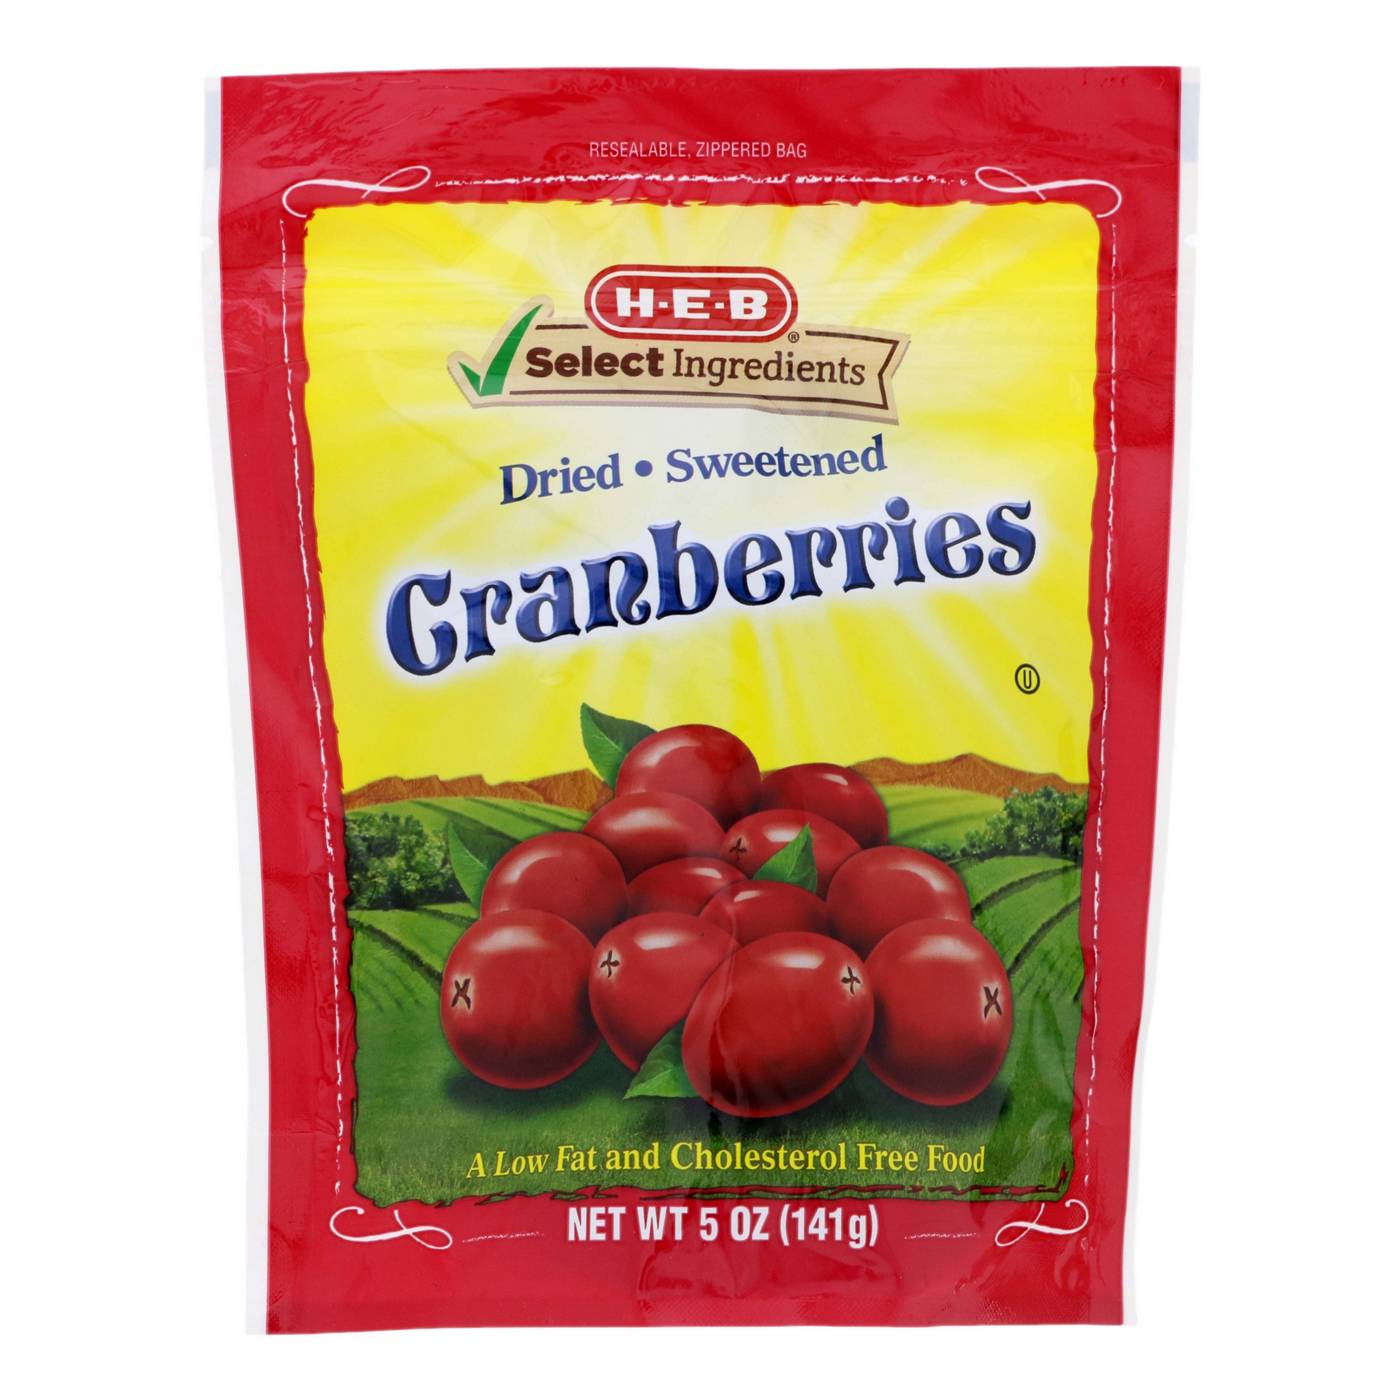 H-E-B Dried Sweetened Cranberries; image 1 of 2